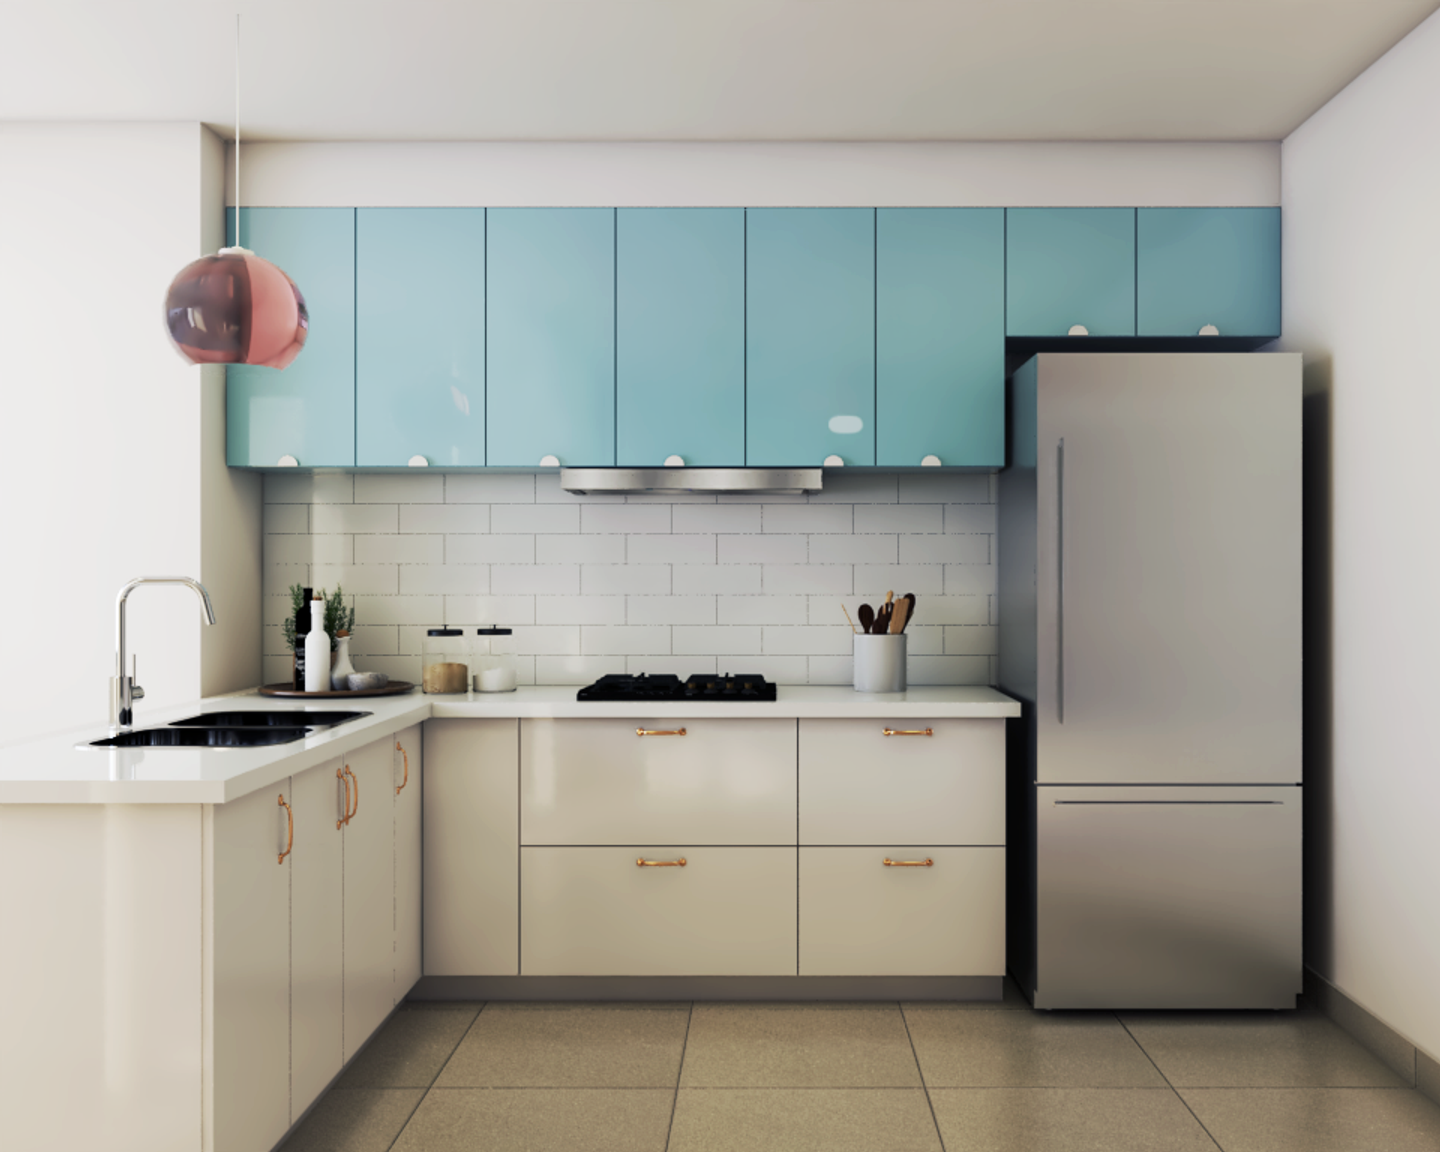 Light Blue and White L-Shaped Kitchen Design with Fridge and Stove - Livspace